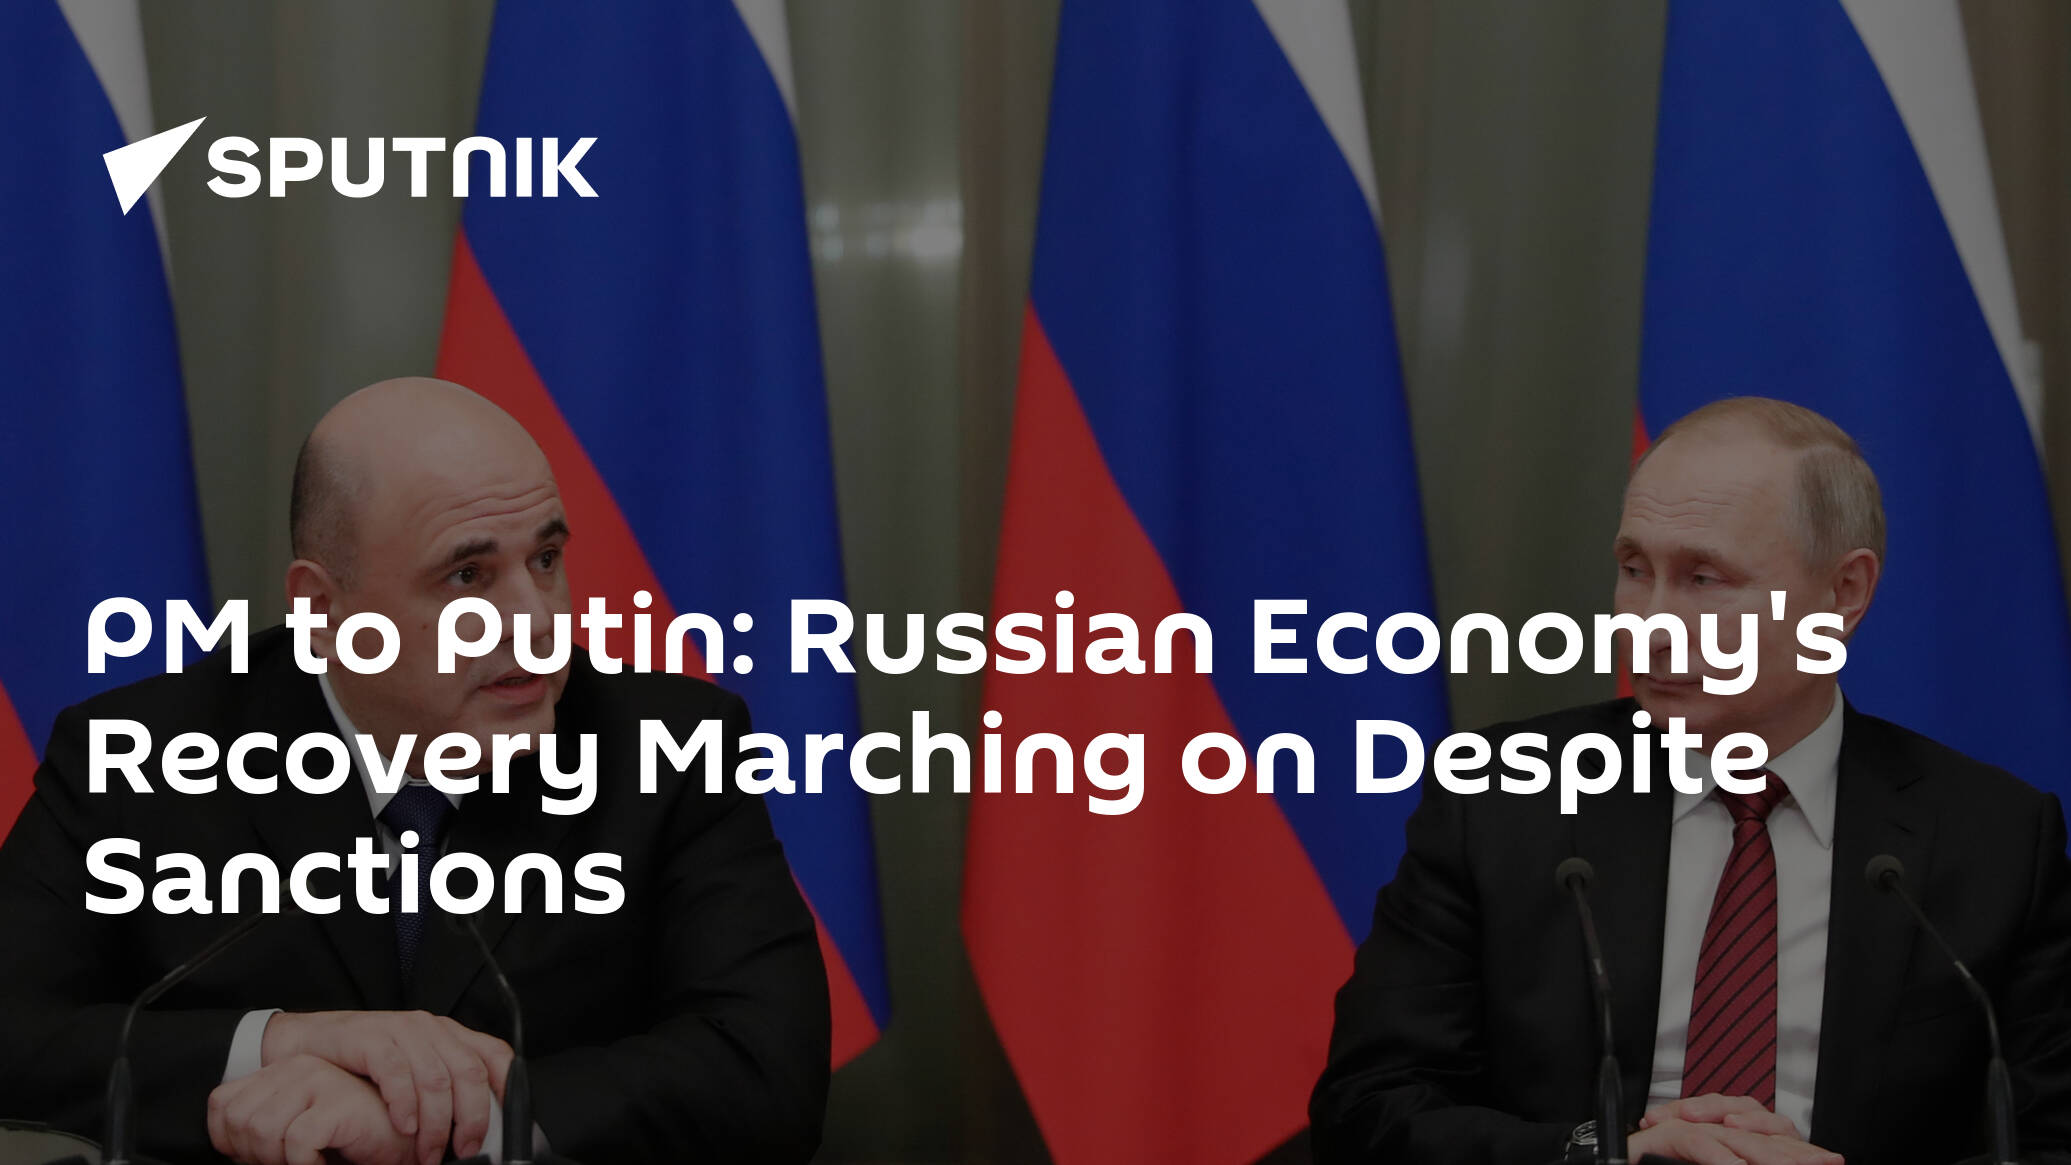 Russian Economy Keeps Recovering Despite Sanctions – Prime Minister at Meeting With Putin